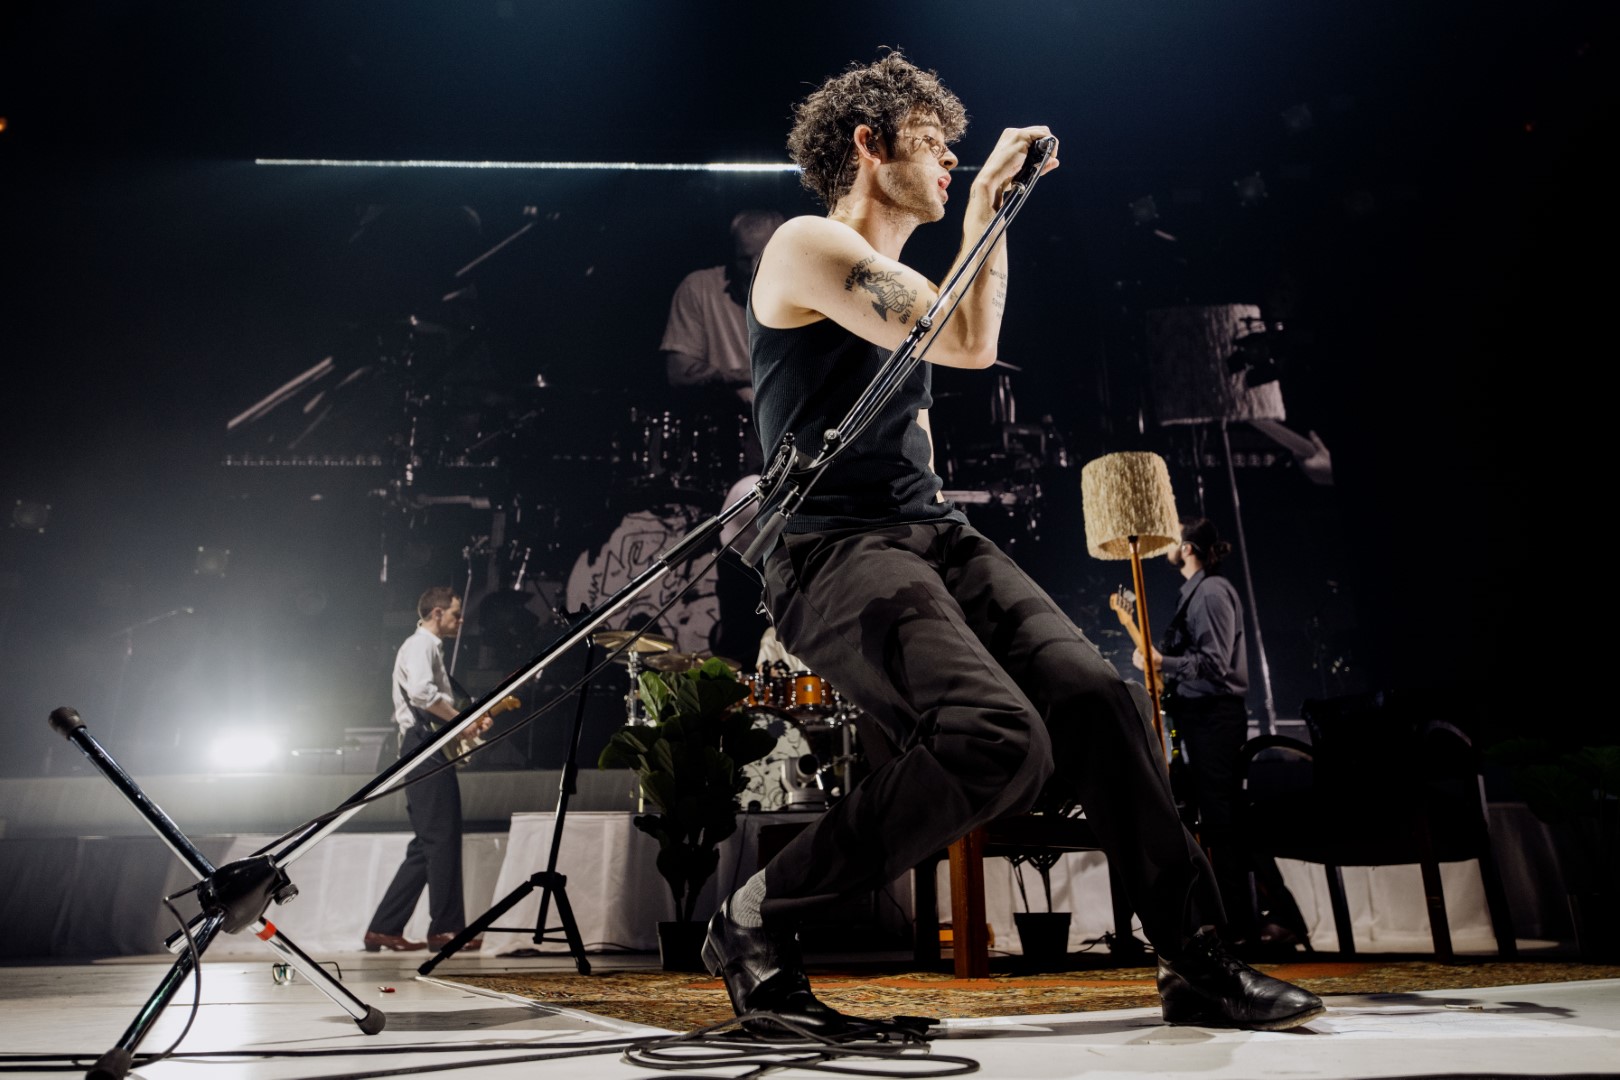 Matty Healy of The 1975 live on stage at Aware Super Arena on the 14th of April 2023. Photo by Jordan Curtis Hughes